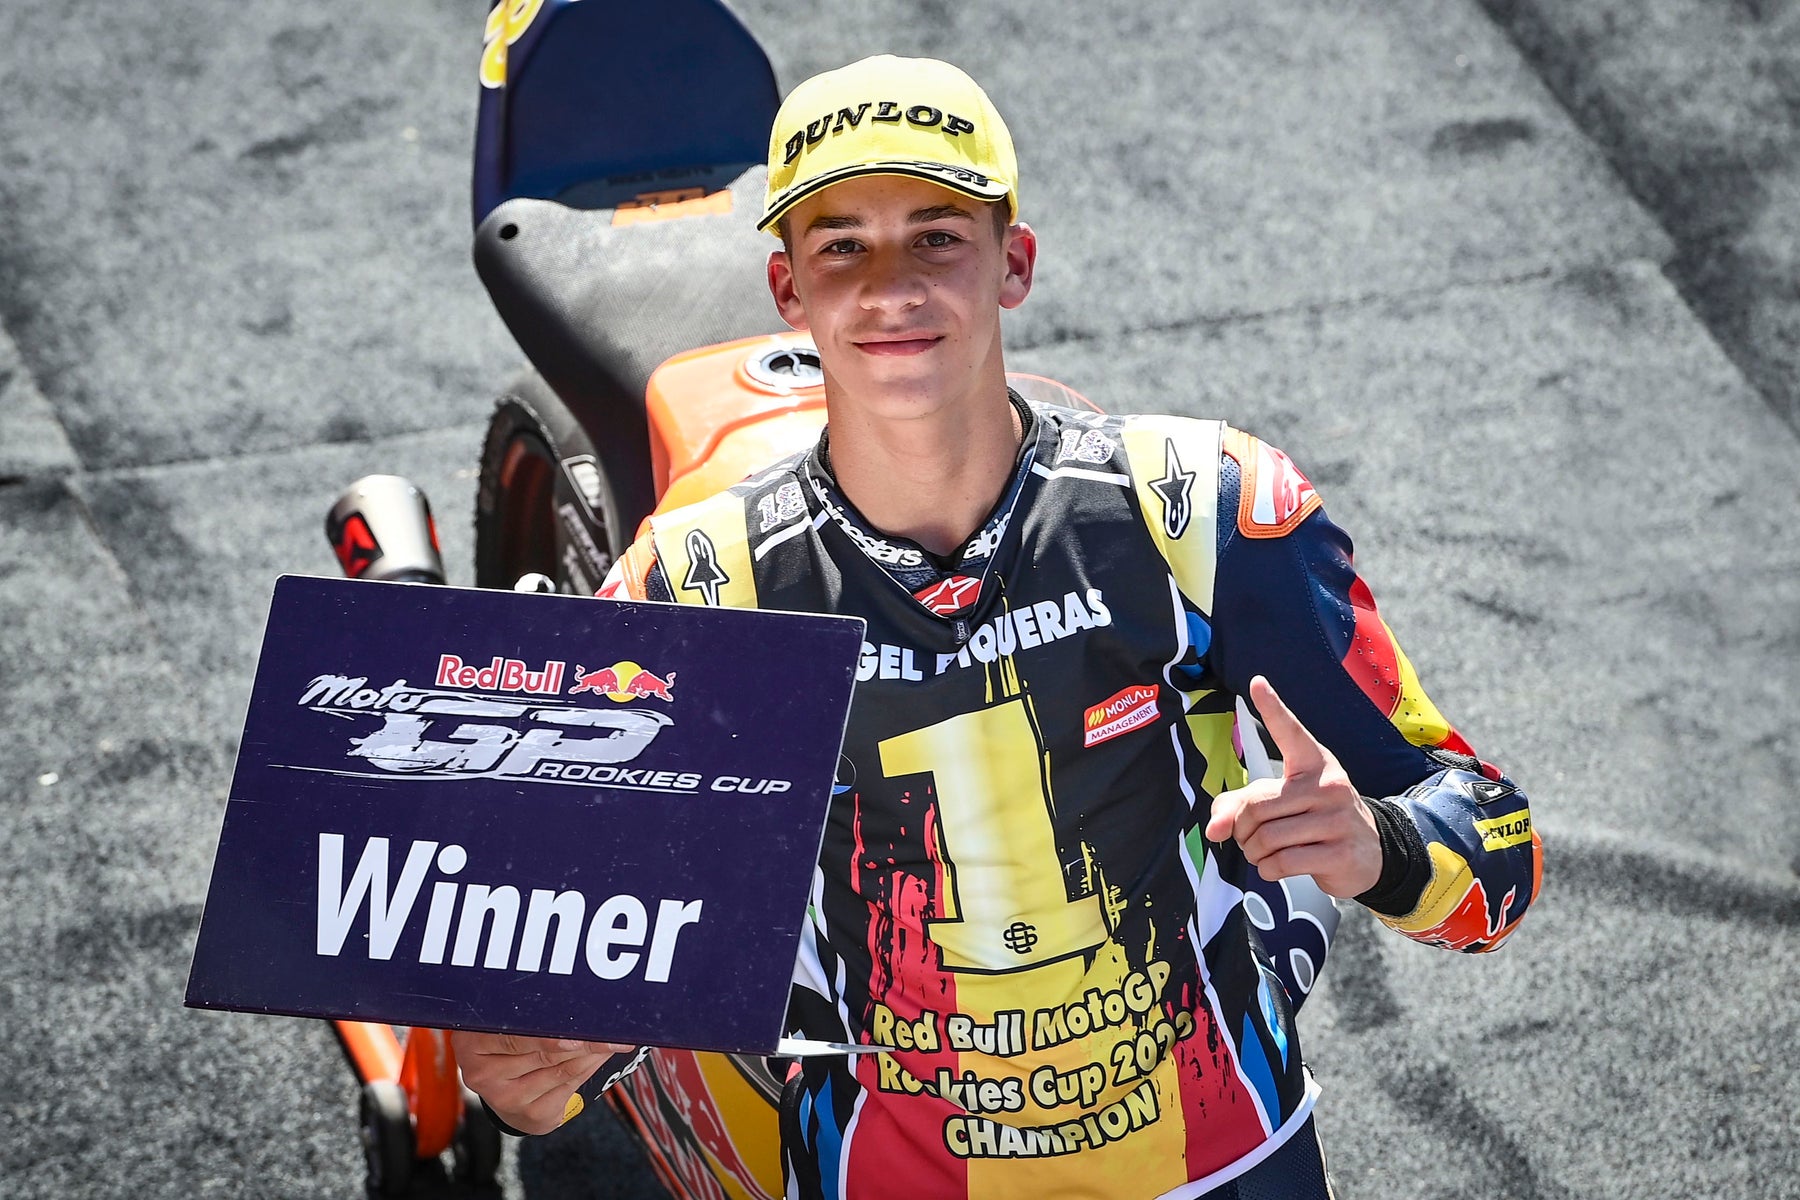 DOUBLE RED BULL ROOKIES CUP VICTORY DELIGHT AT ASSEN SEALS ANGEL PIQUERAS THE CHAMPIONSHIP